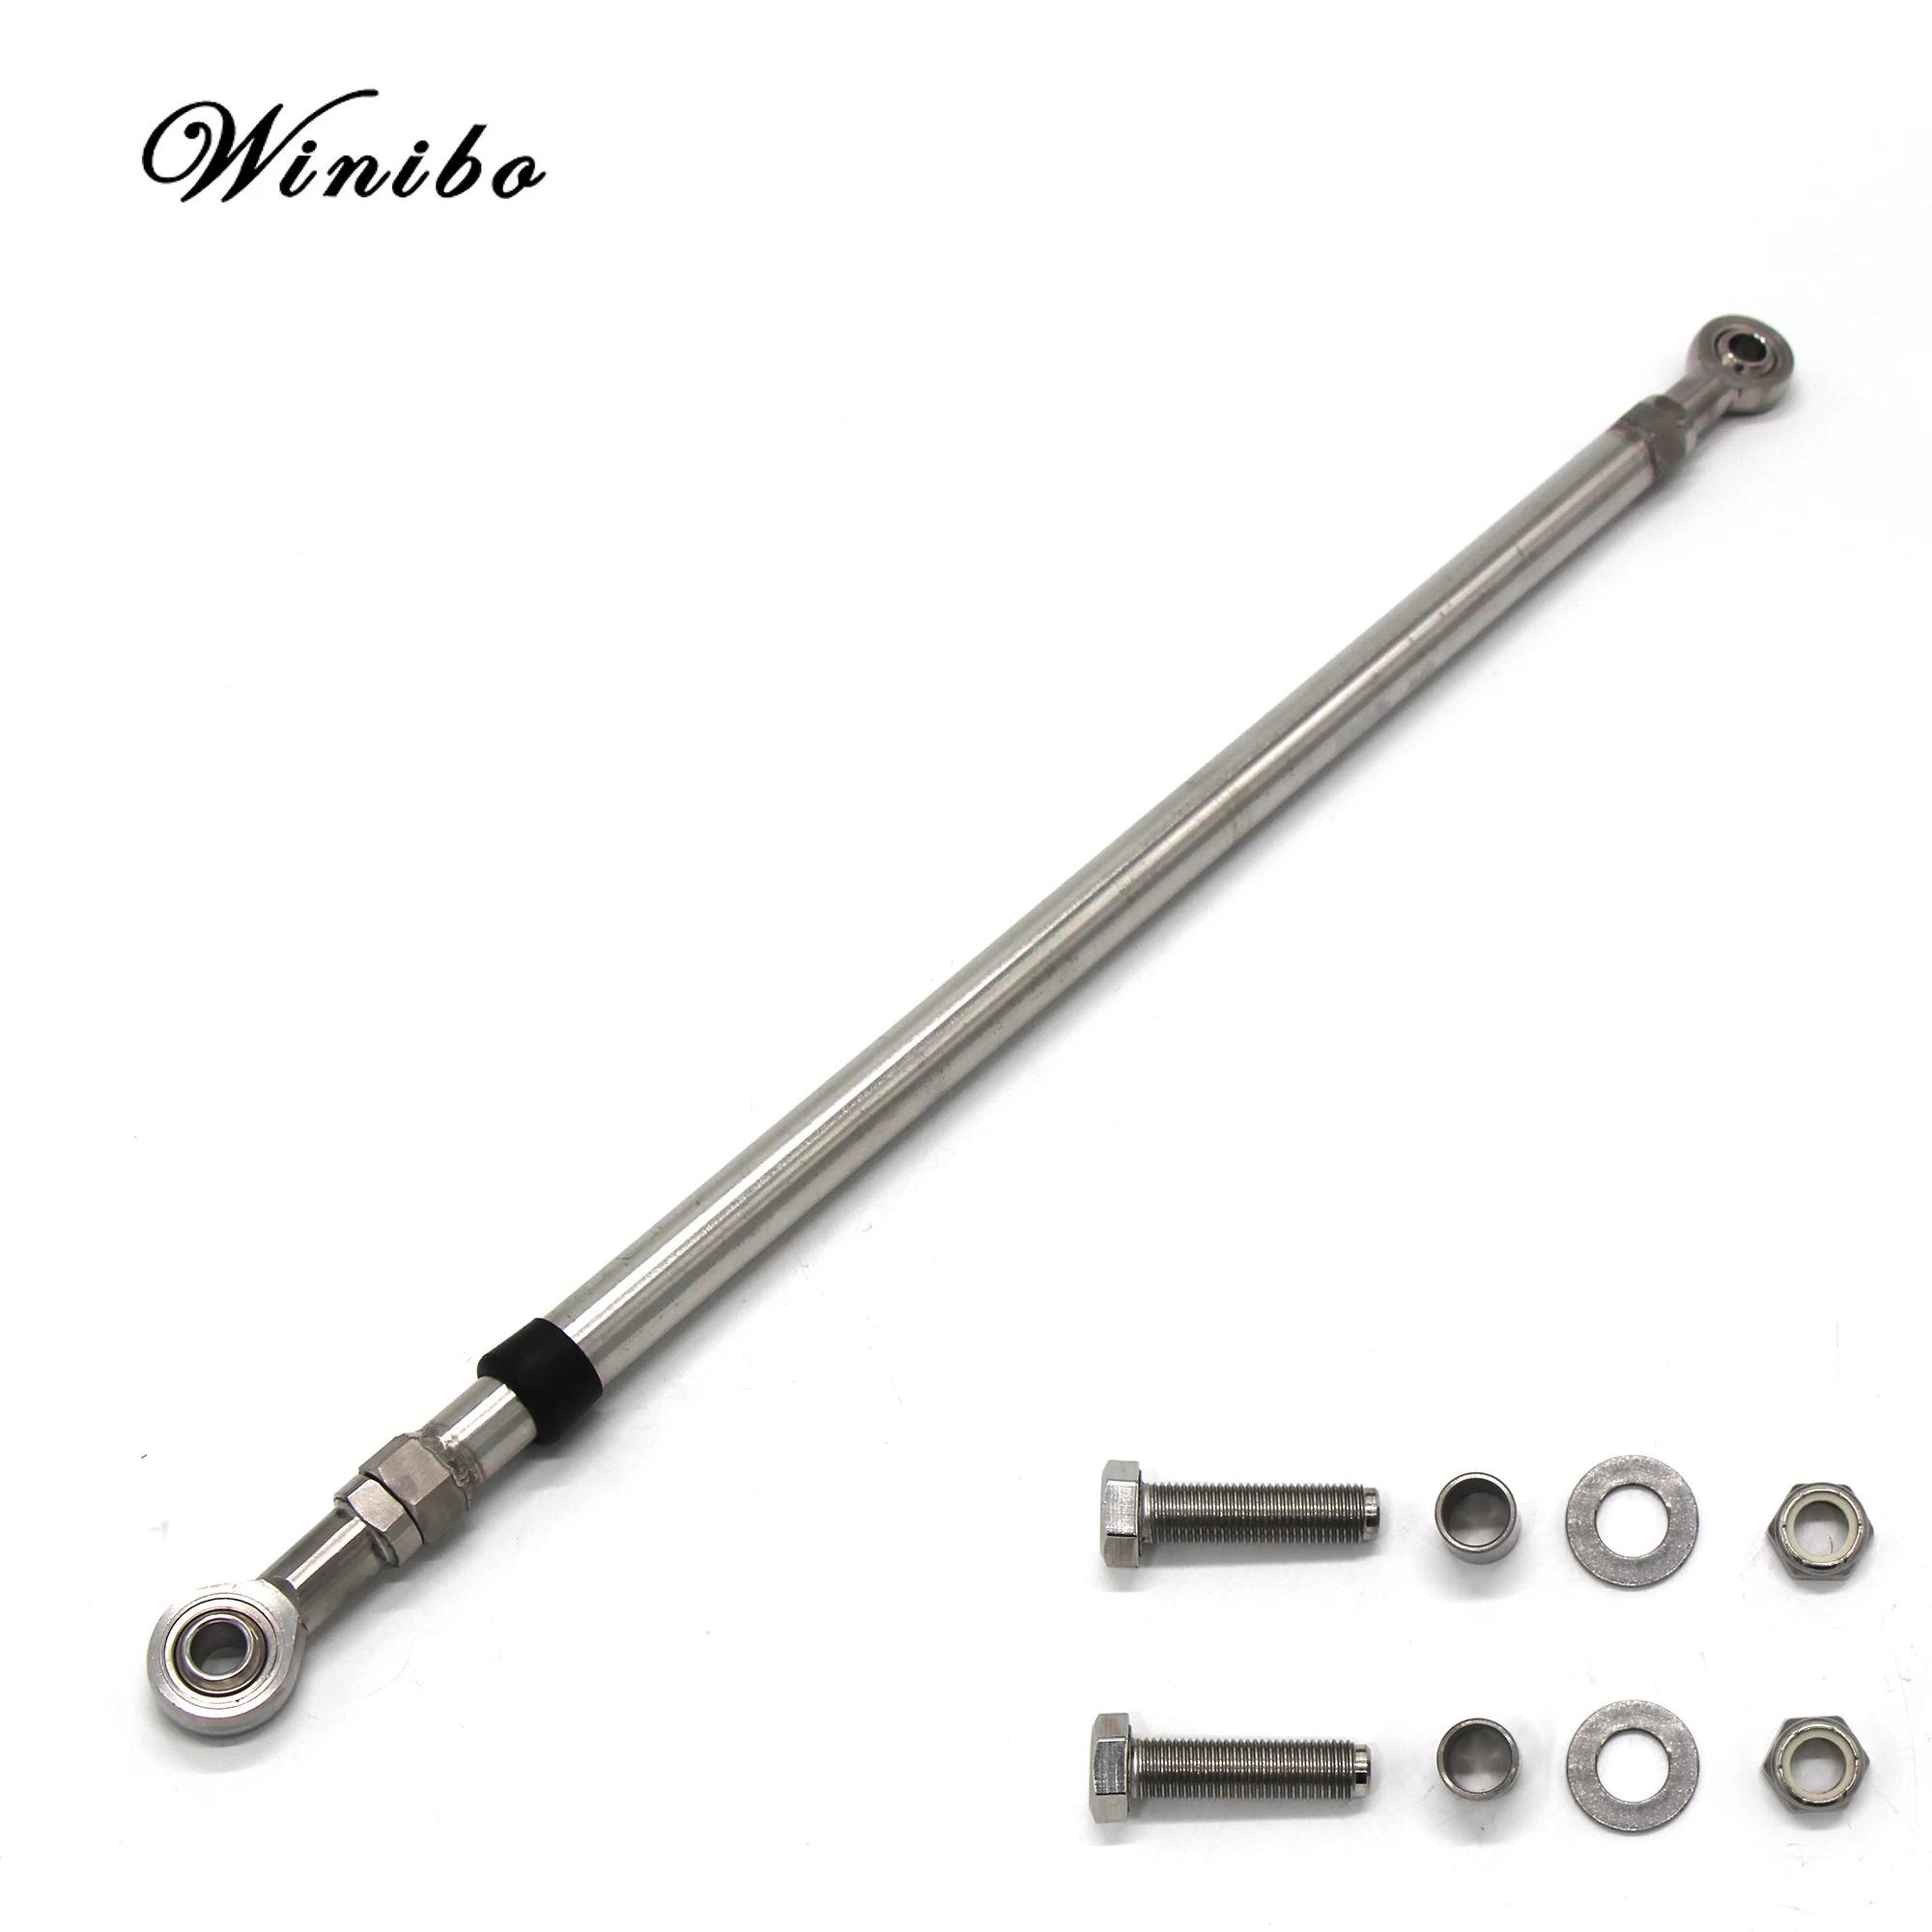 Adjustable Stainless Steel Rustproof Tie Bar for Multi-Engine Boats Marine Twin Engine Outboard Connecting Rods hinge drill bit l hex wrench kit self centering for woodwork screwing drilling accessories high speed steel rustproof silver